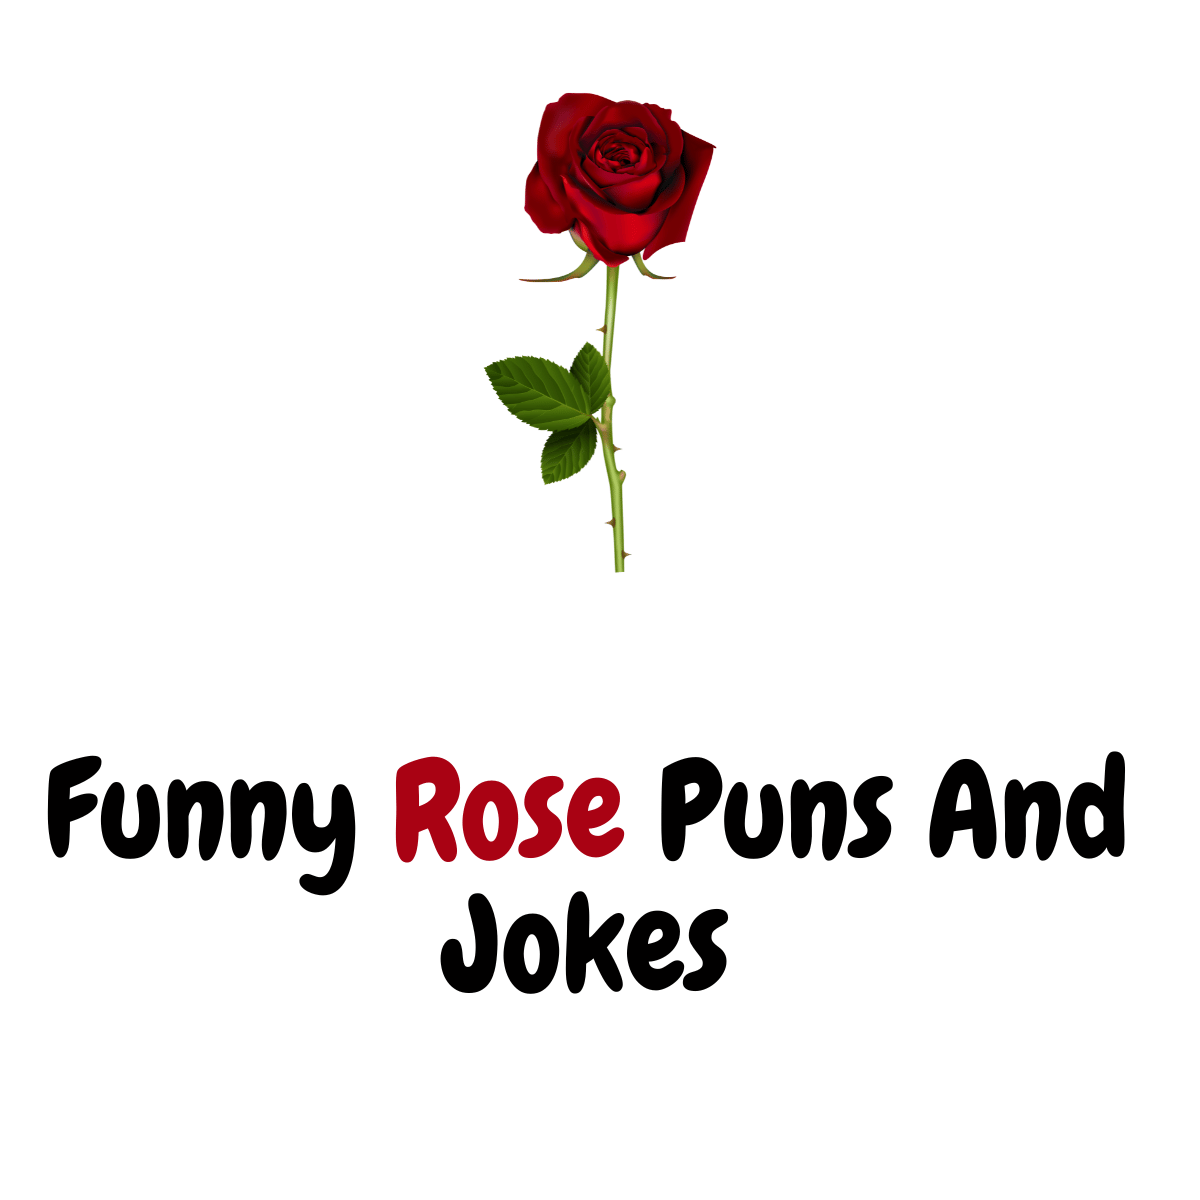 Funny Rose Puns And Jokes